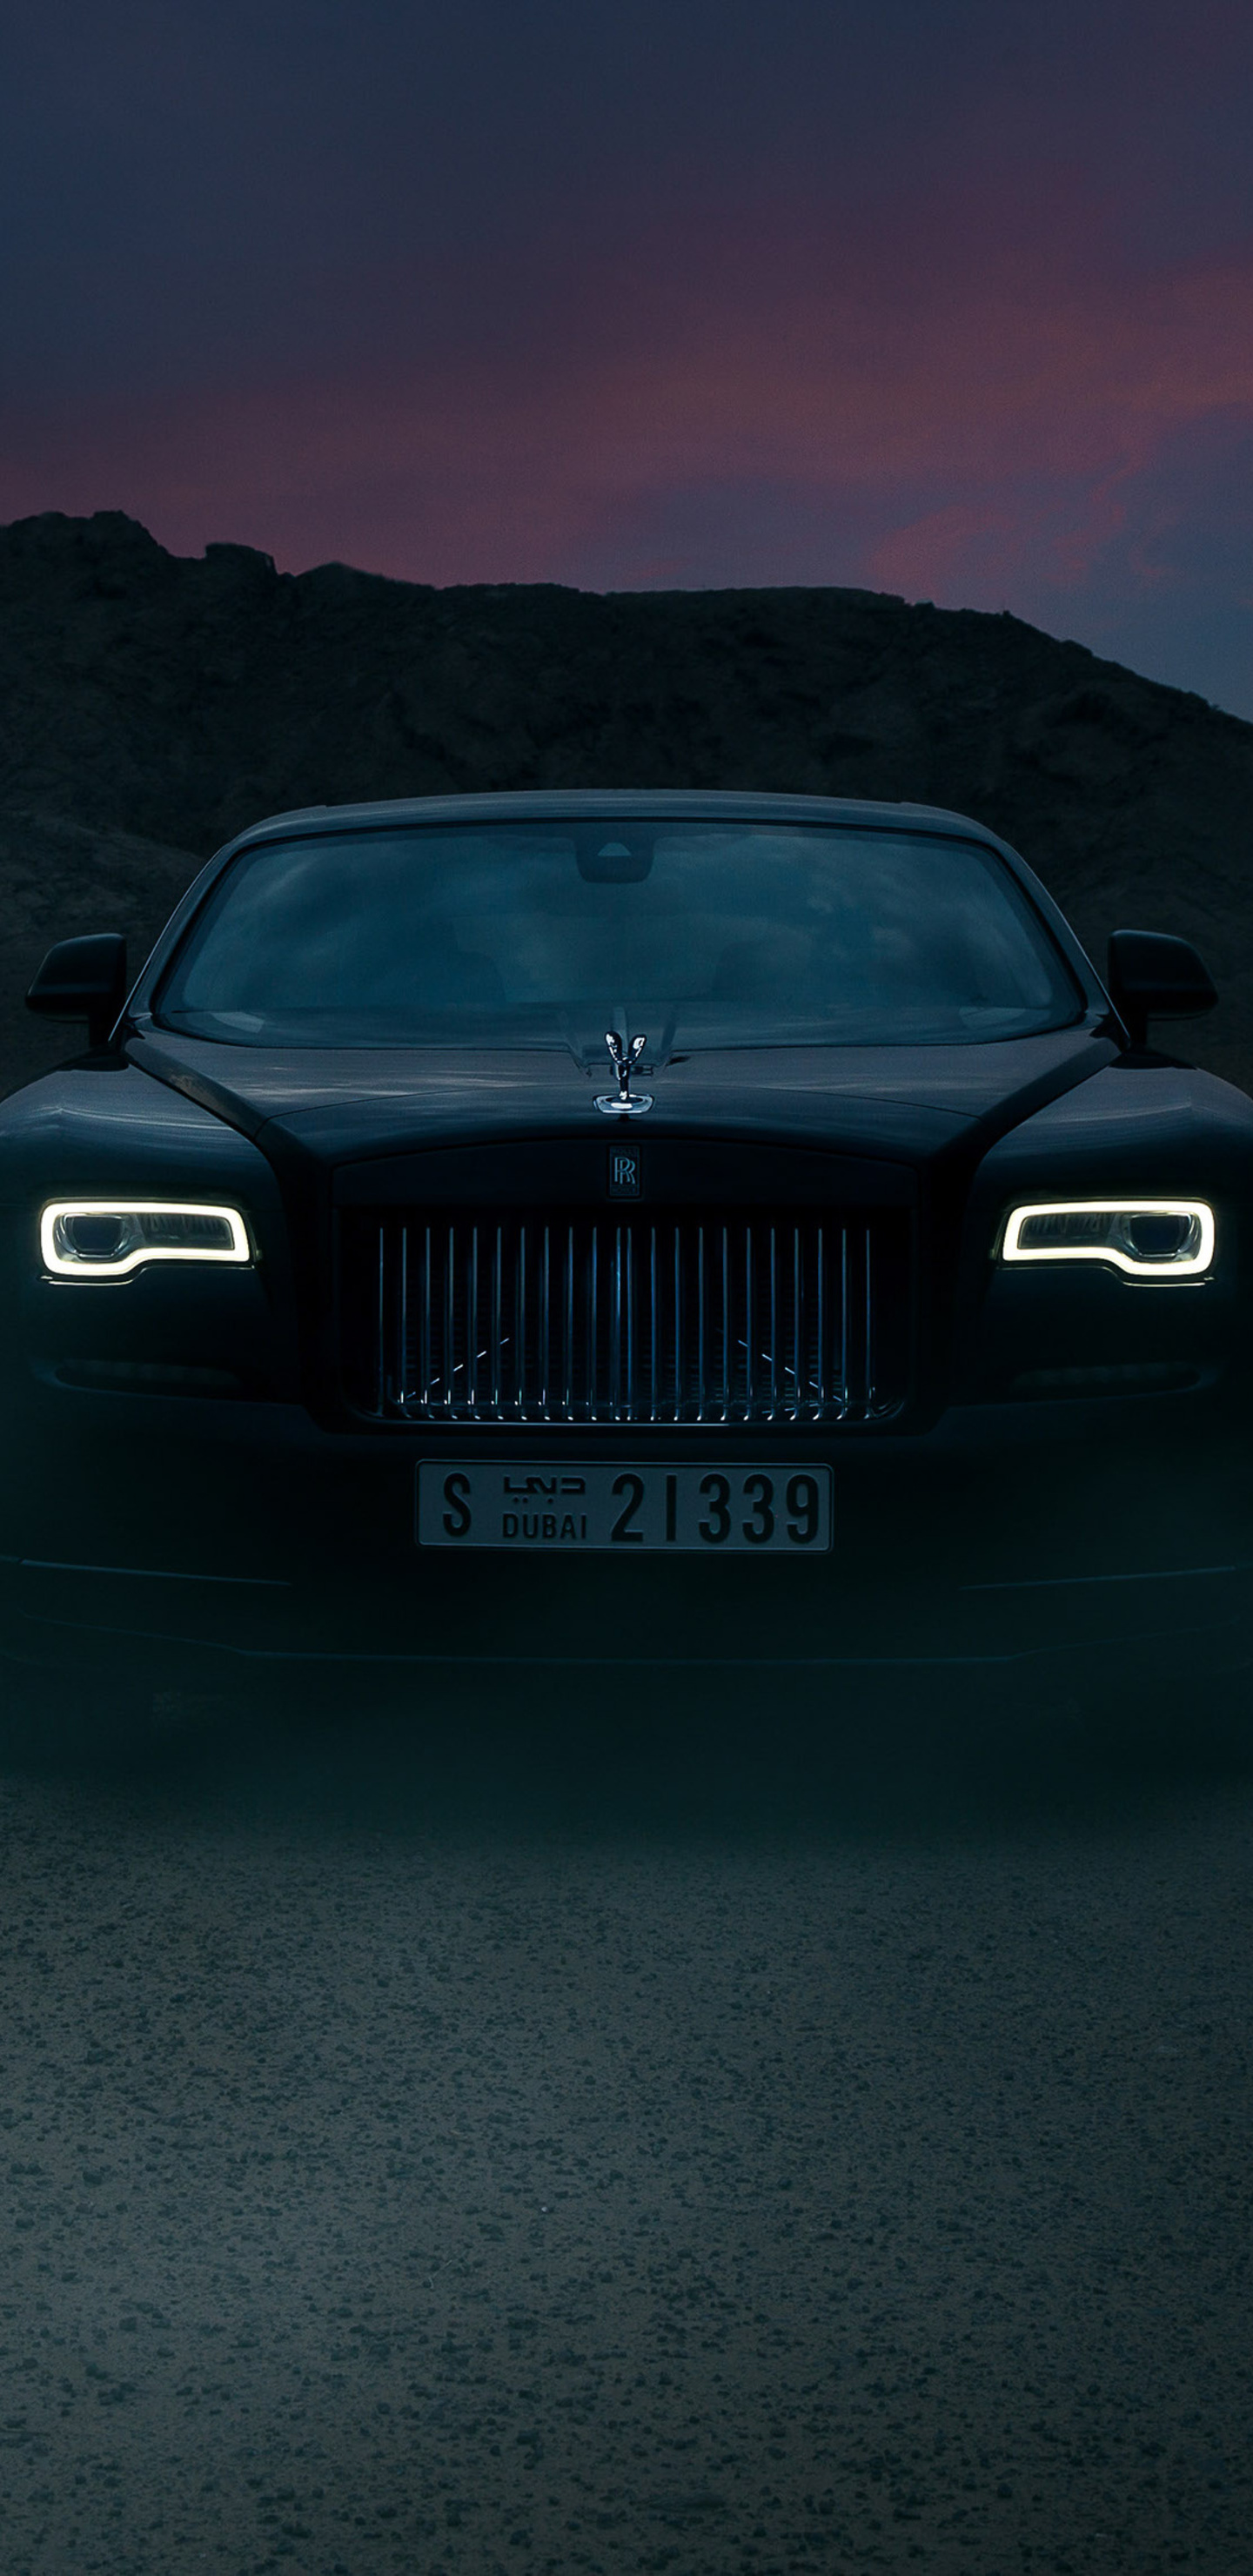 1440x2960 Rolls Royce Wraith Black Badge Samsung Galaxy Note 9,8, S9,S8,S8+  QHD HD 4k Wallpapers, Images, Backgrounds, Photos and Pictures